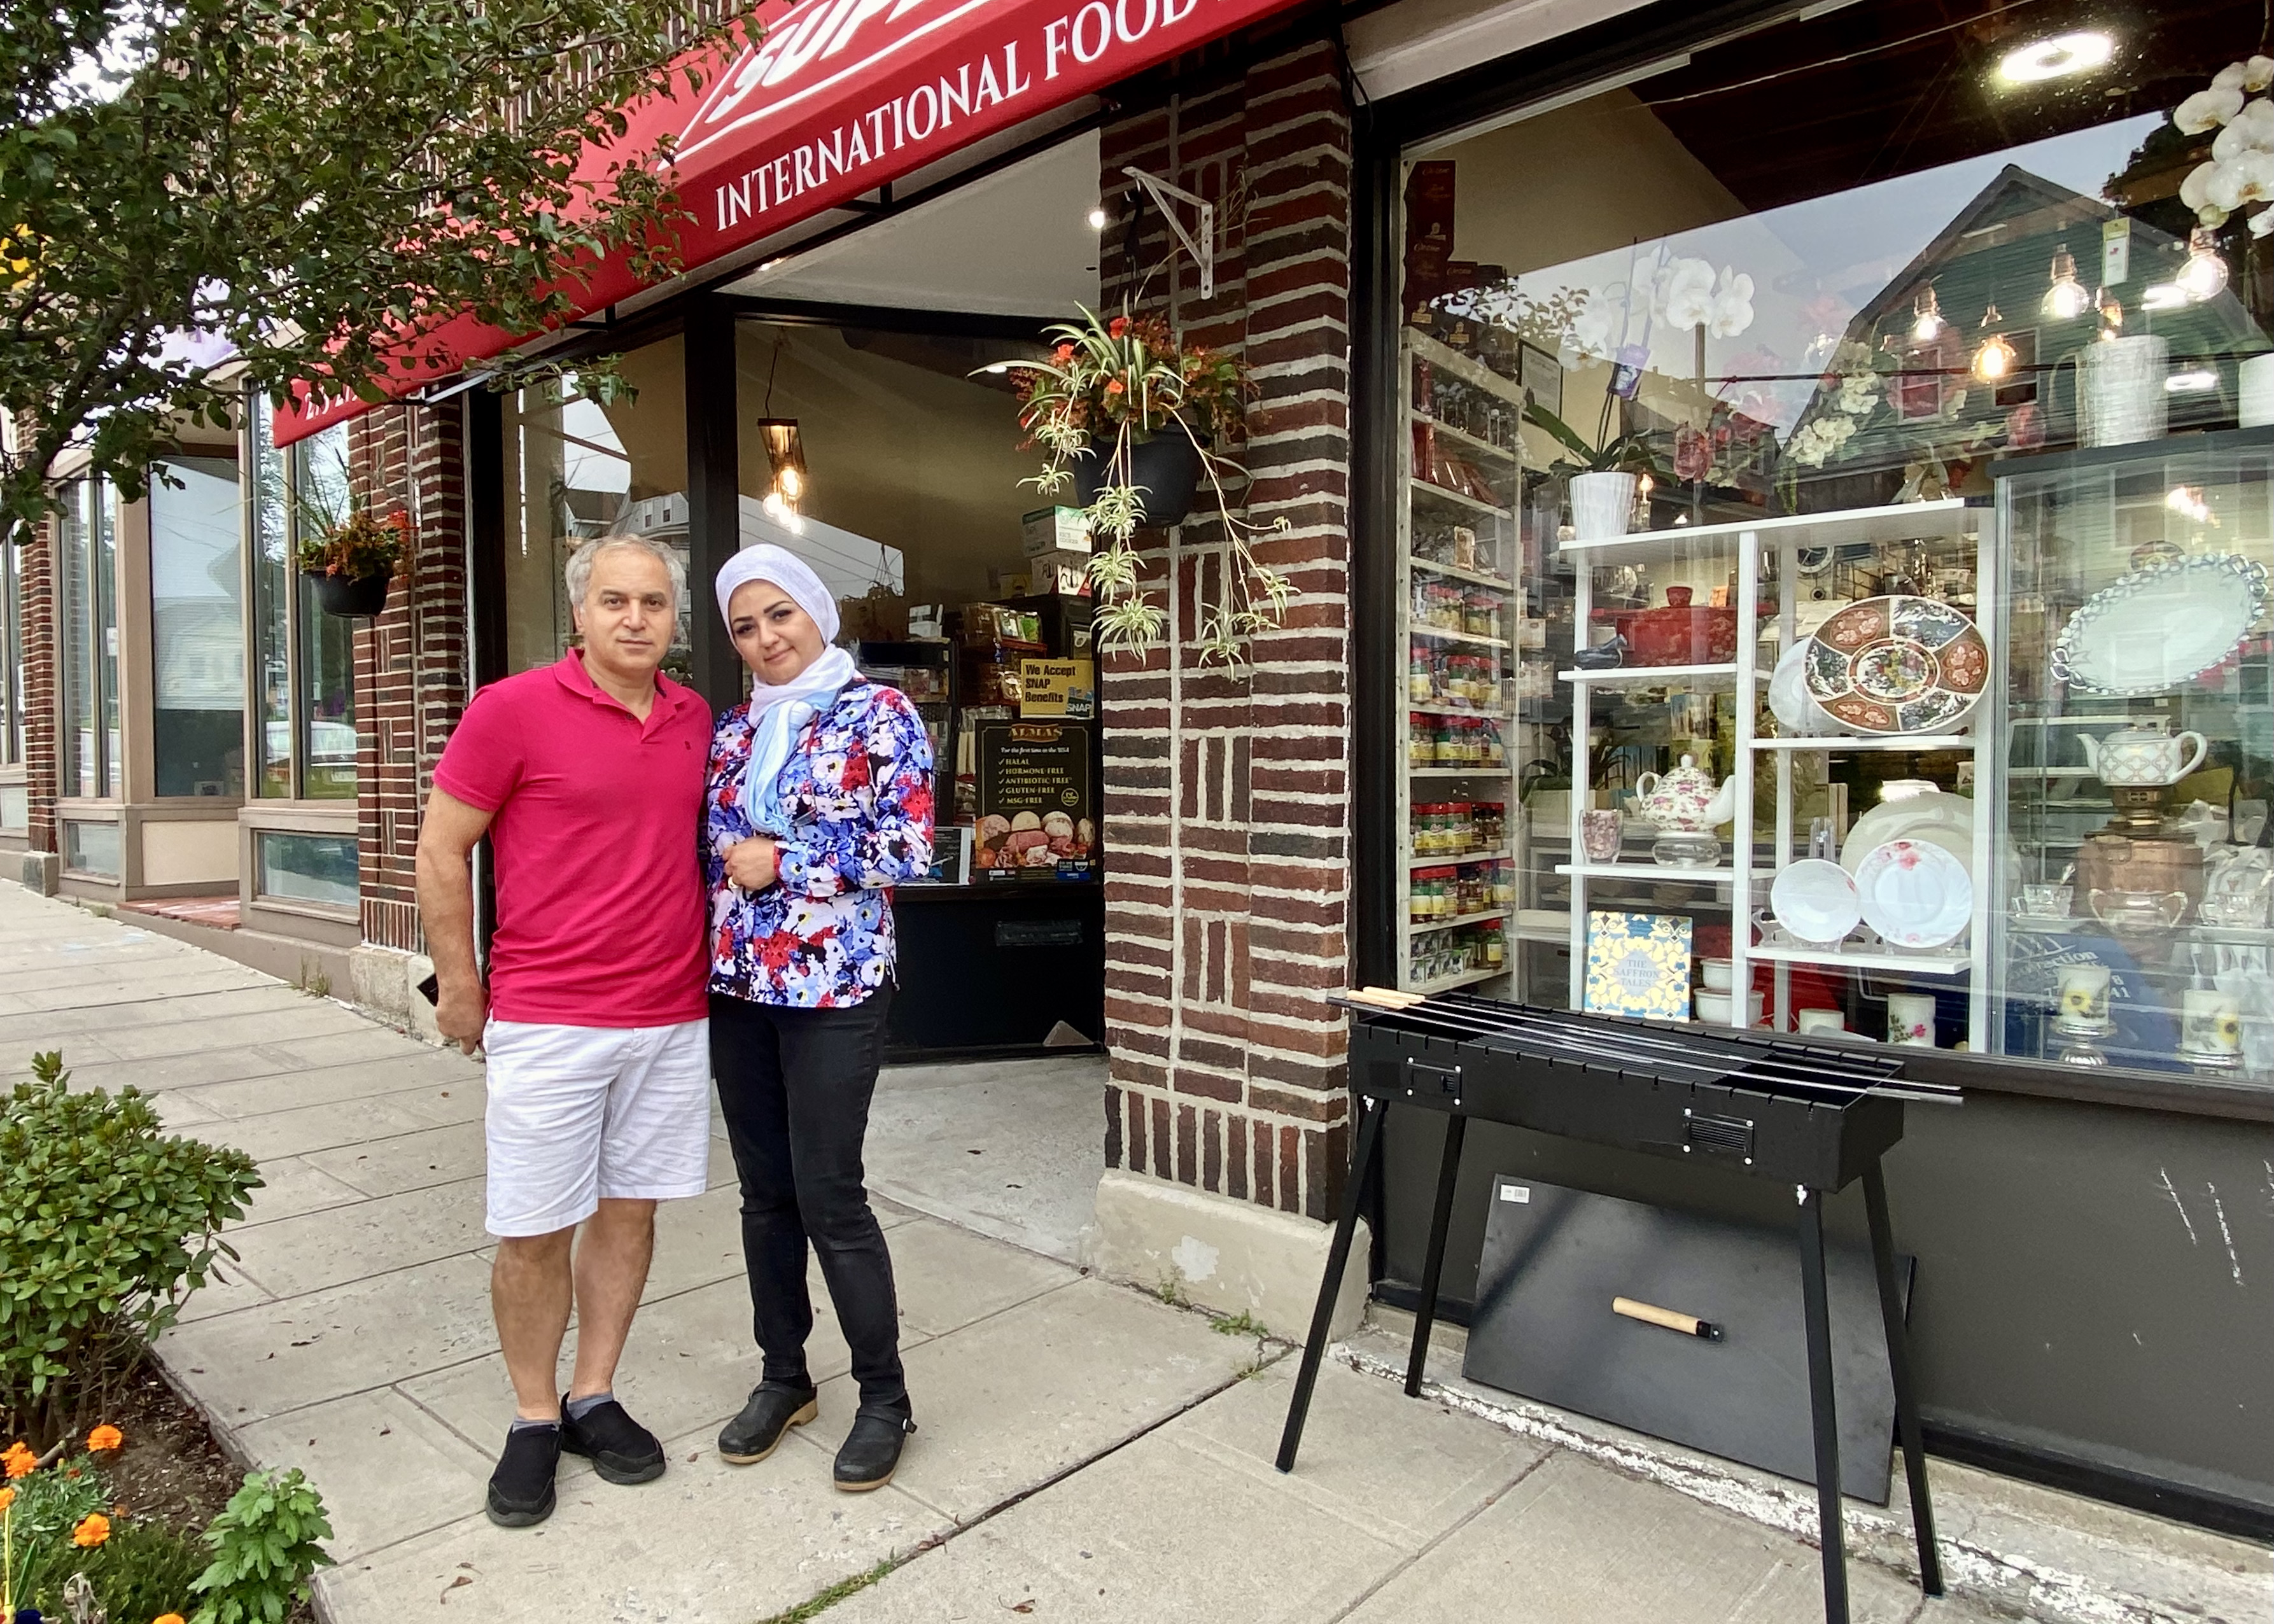 Super Vanak is a new Persian market in Belmont run by Babak Shams Asef and Zohreh Beheshti, husband and wife. Beheshti says Tony Russo, a friend, predicts her store will benefit from Russo’s closure as customers seek out items formerly carried in his Watertown store.